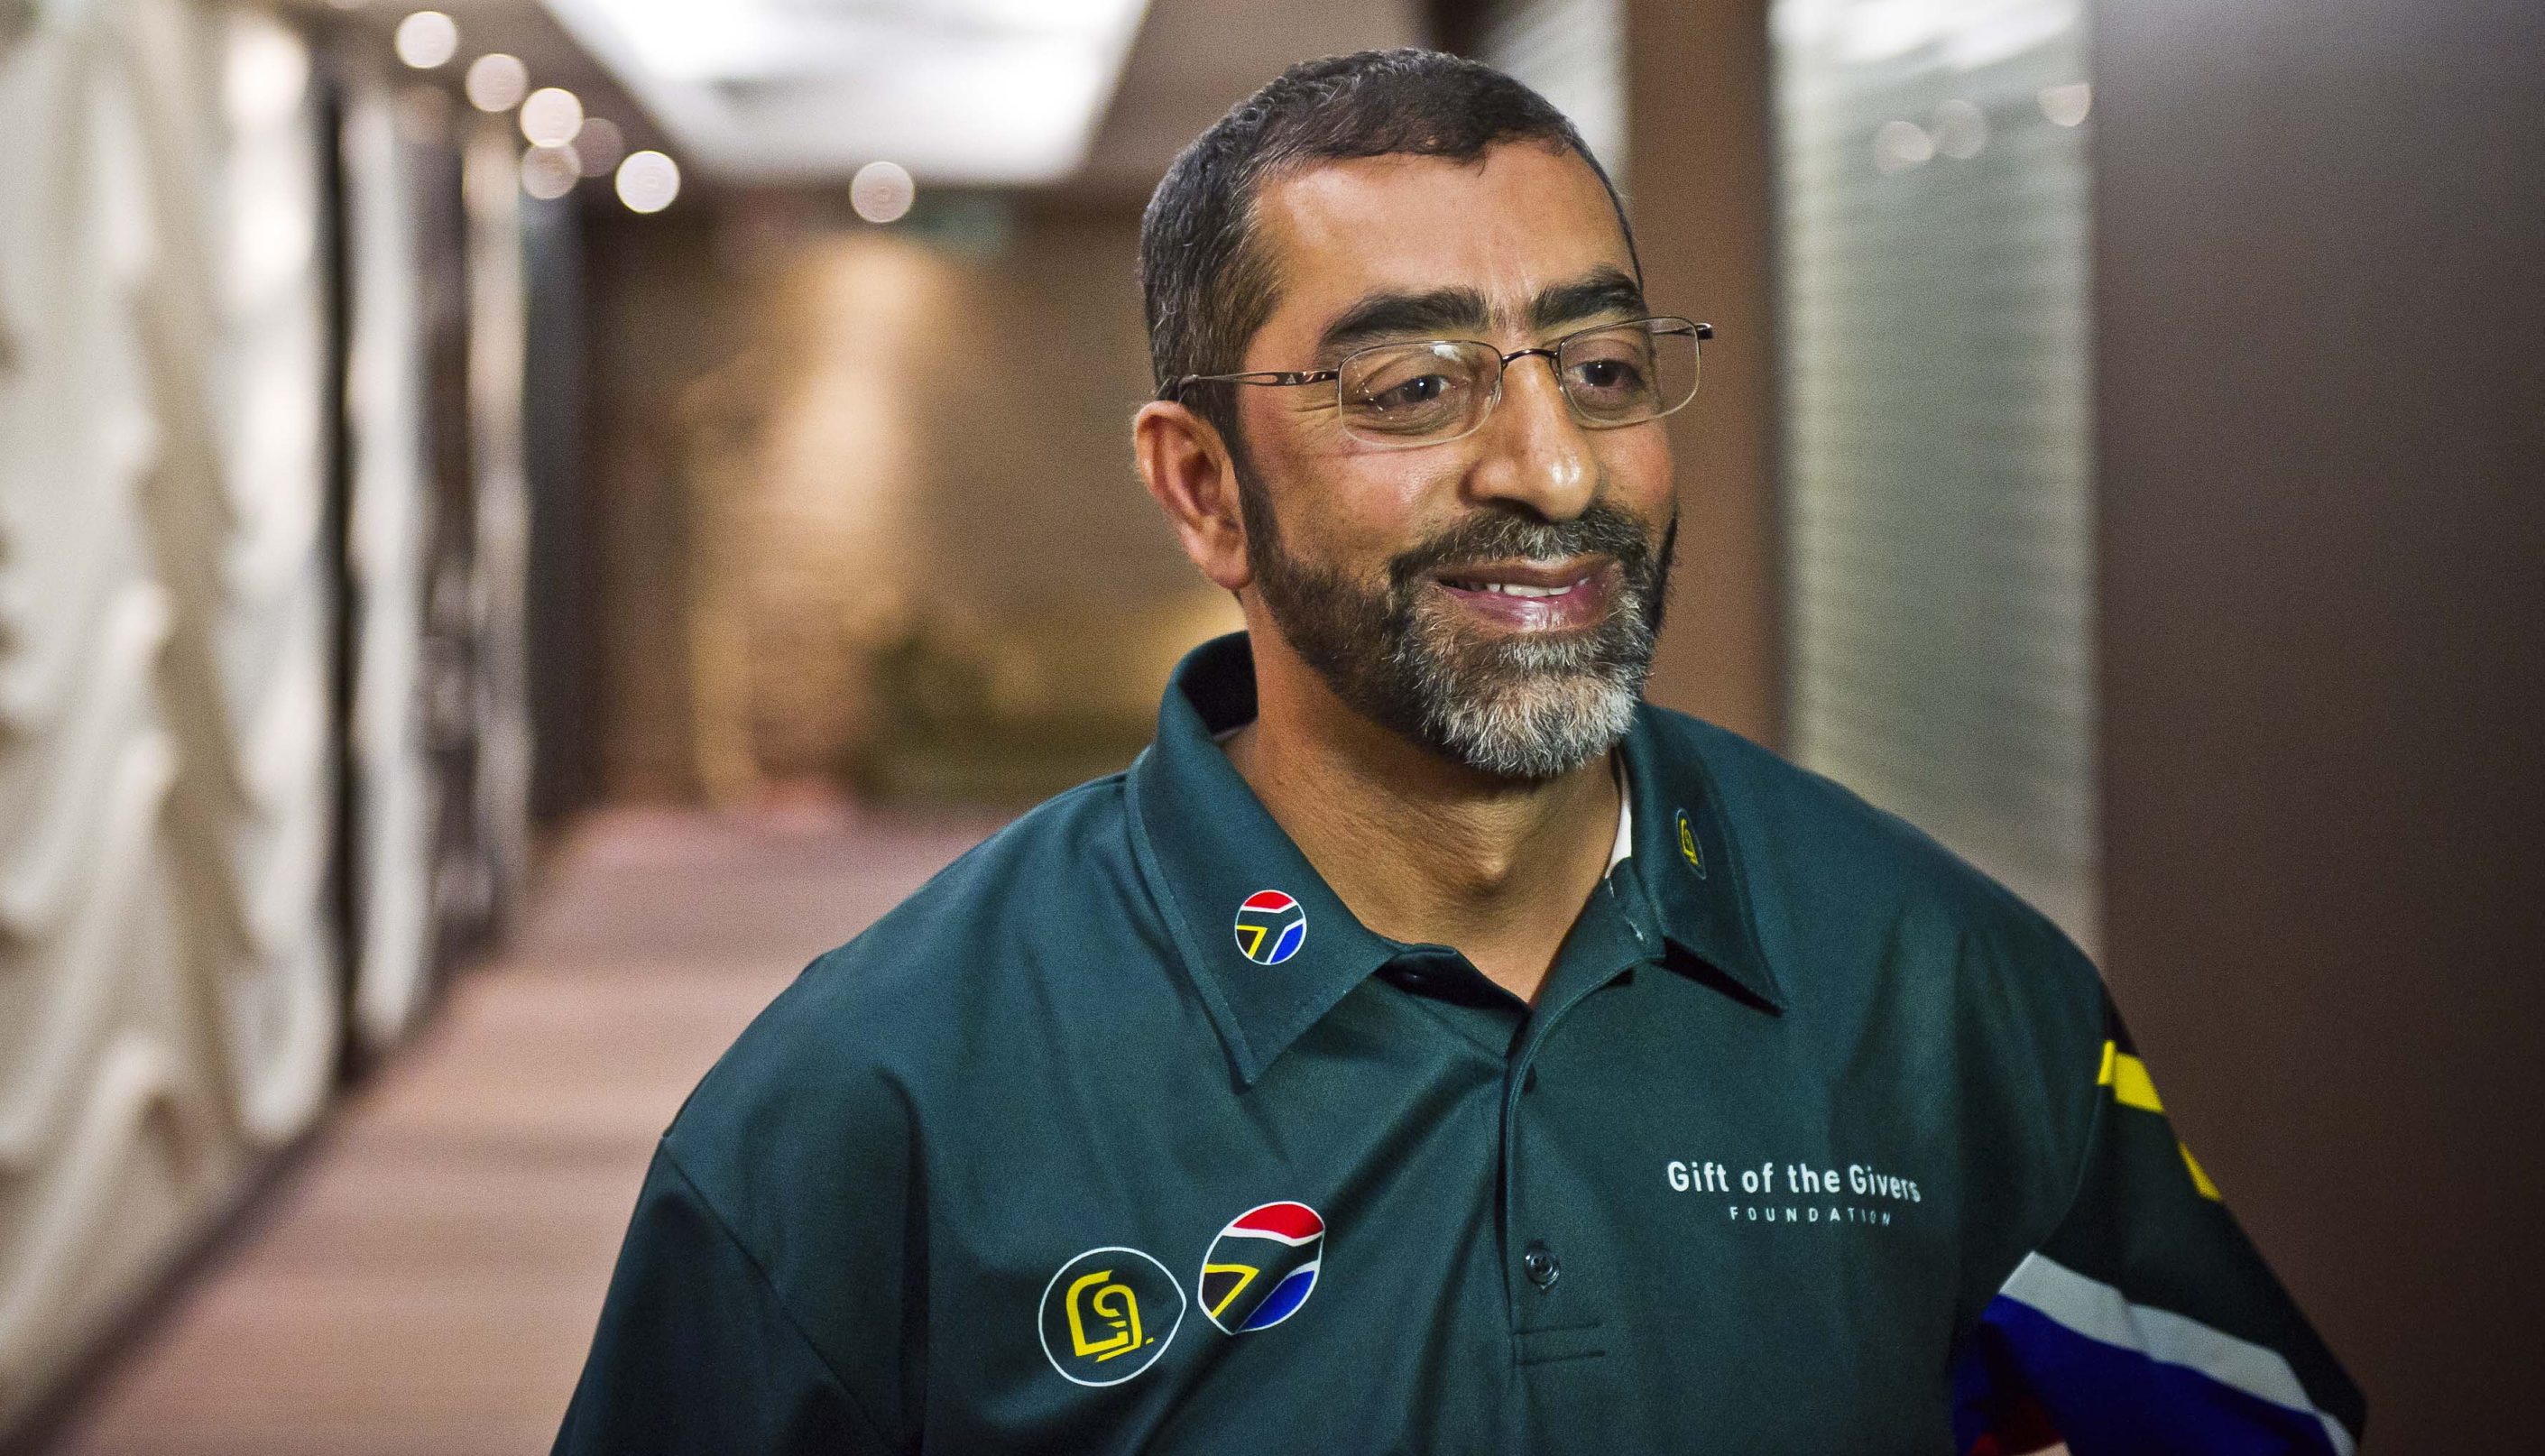 Imtiaz Sooliman of the Gift of Givers organisation on August 9, 2011 in Johannesburg, South Africa.